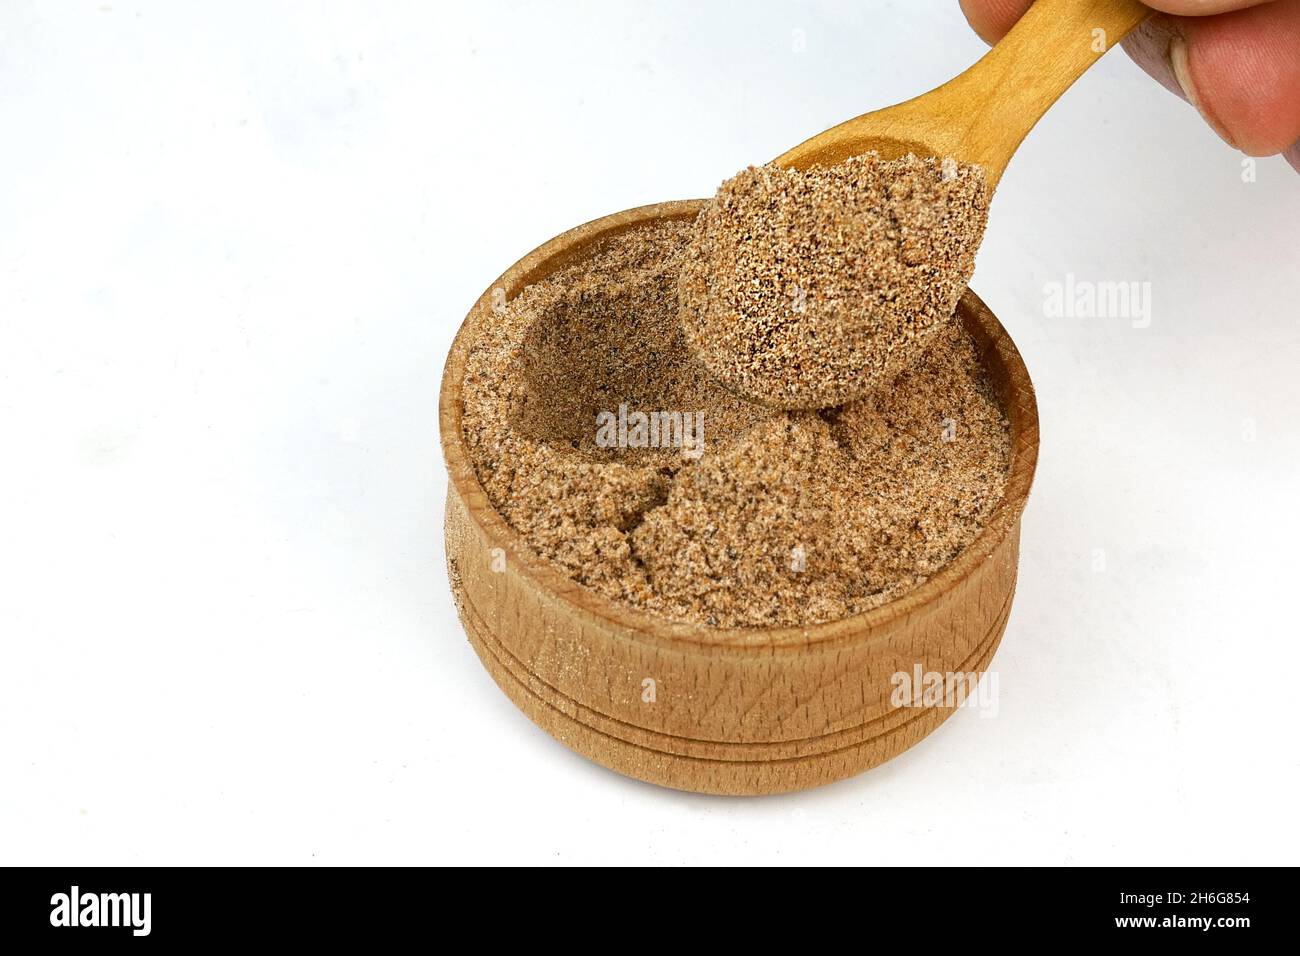 Chef taking chopped dry nutmeg powder spices from wooden spice jar. Close-up. Selective focus. Close-up. Stock Photo